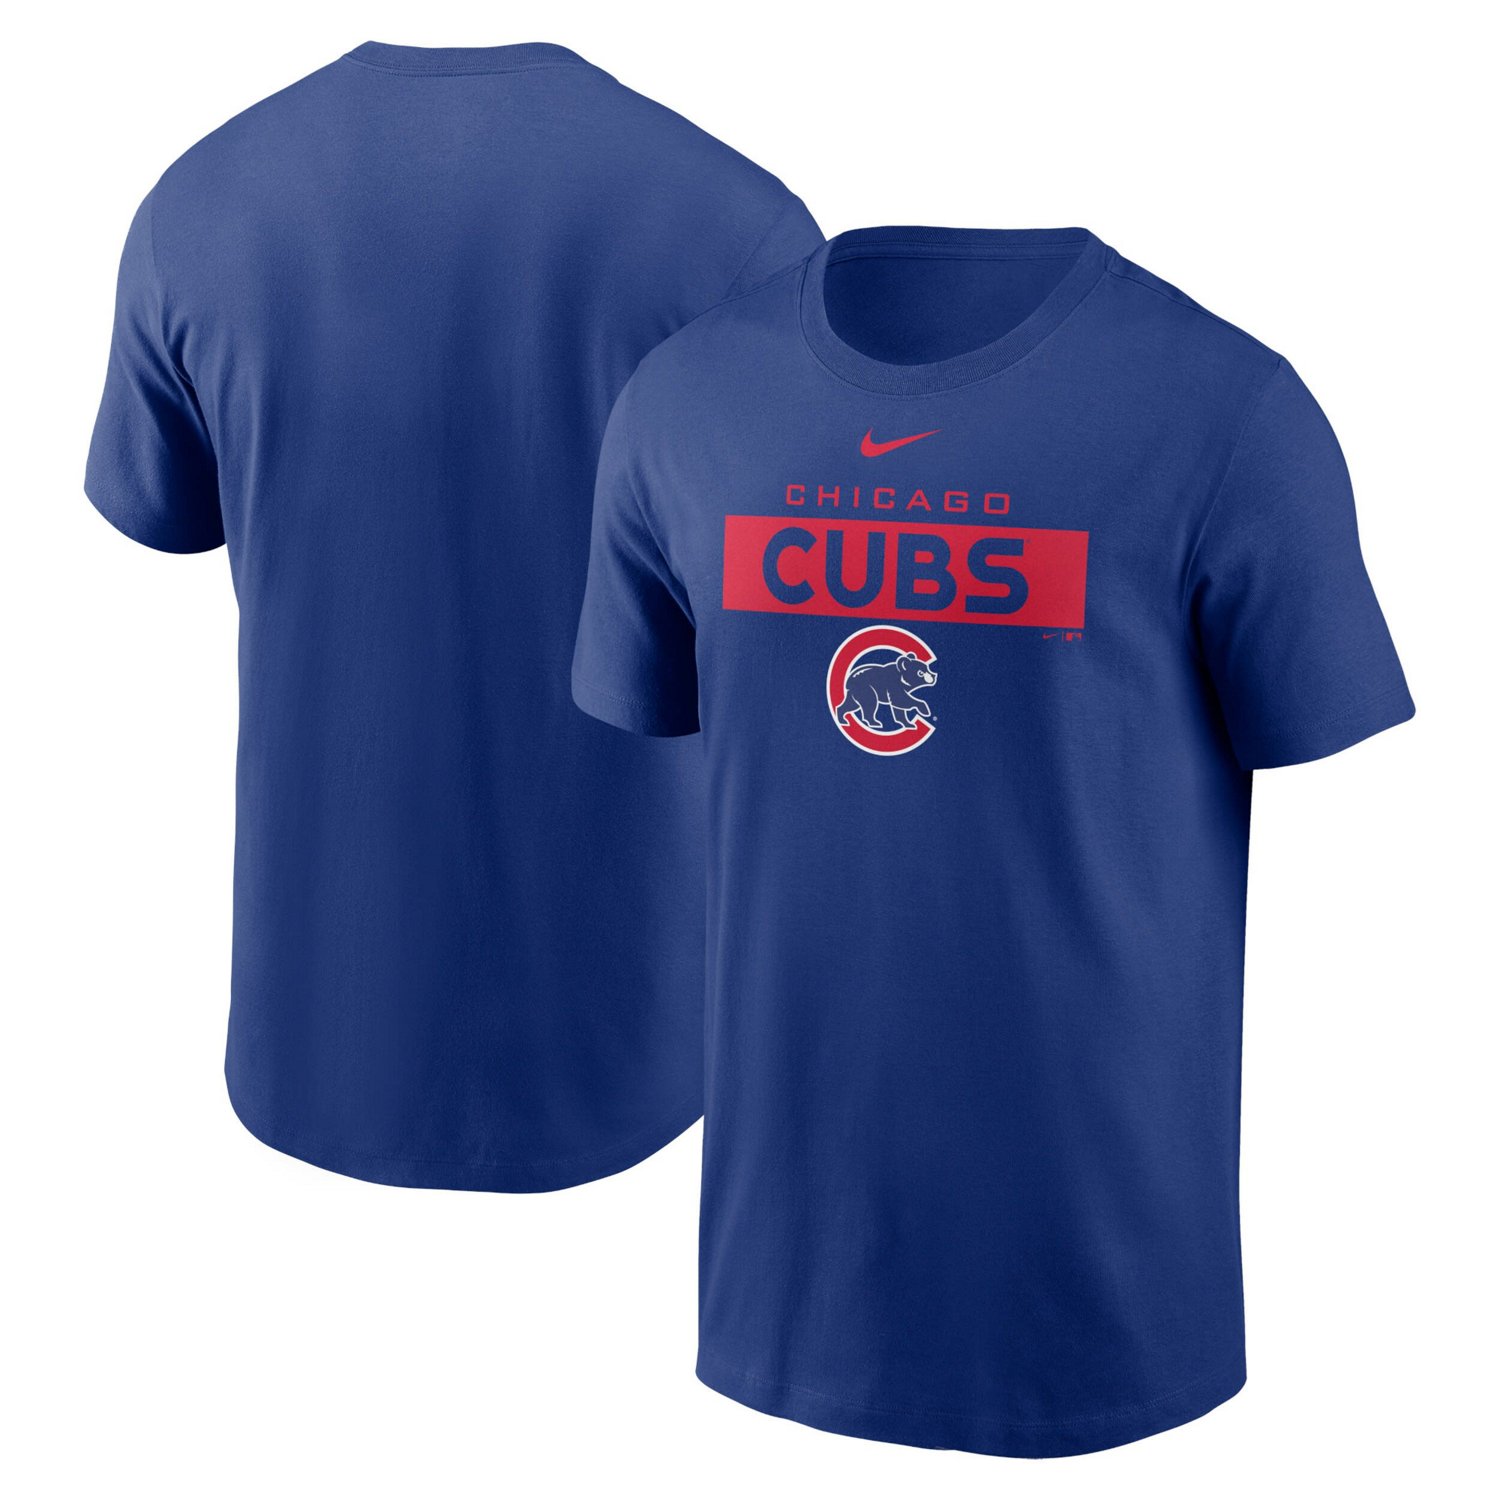 Nike Chicago Cubs Team T-Shirt | Free Shipping at Academy